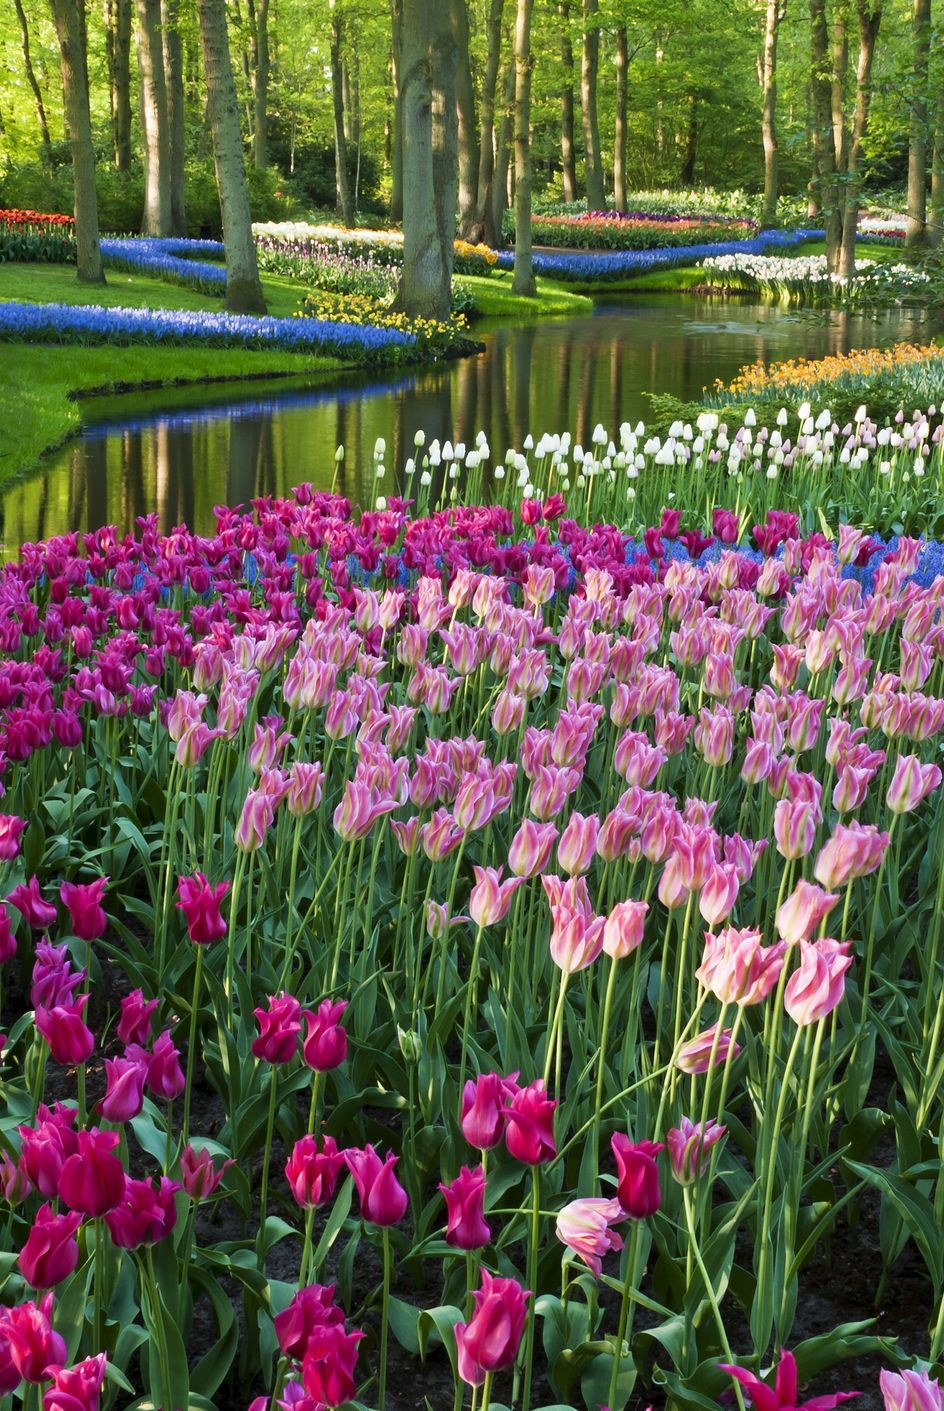 park with multi colored spring flowers along a pond location is the keukenhof garden, netherlandsother tulip images